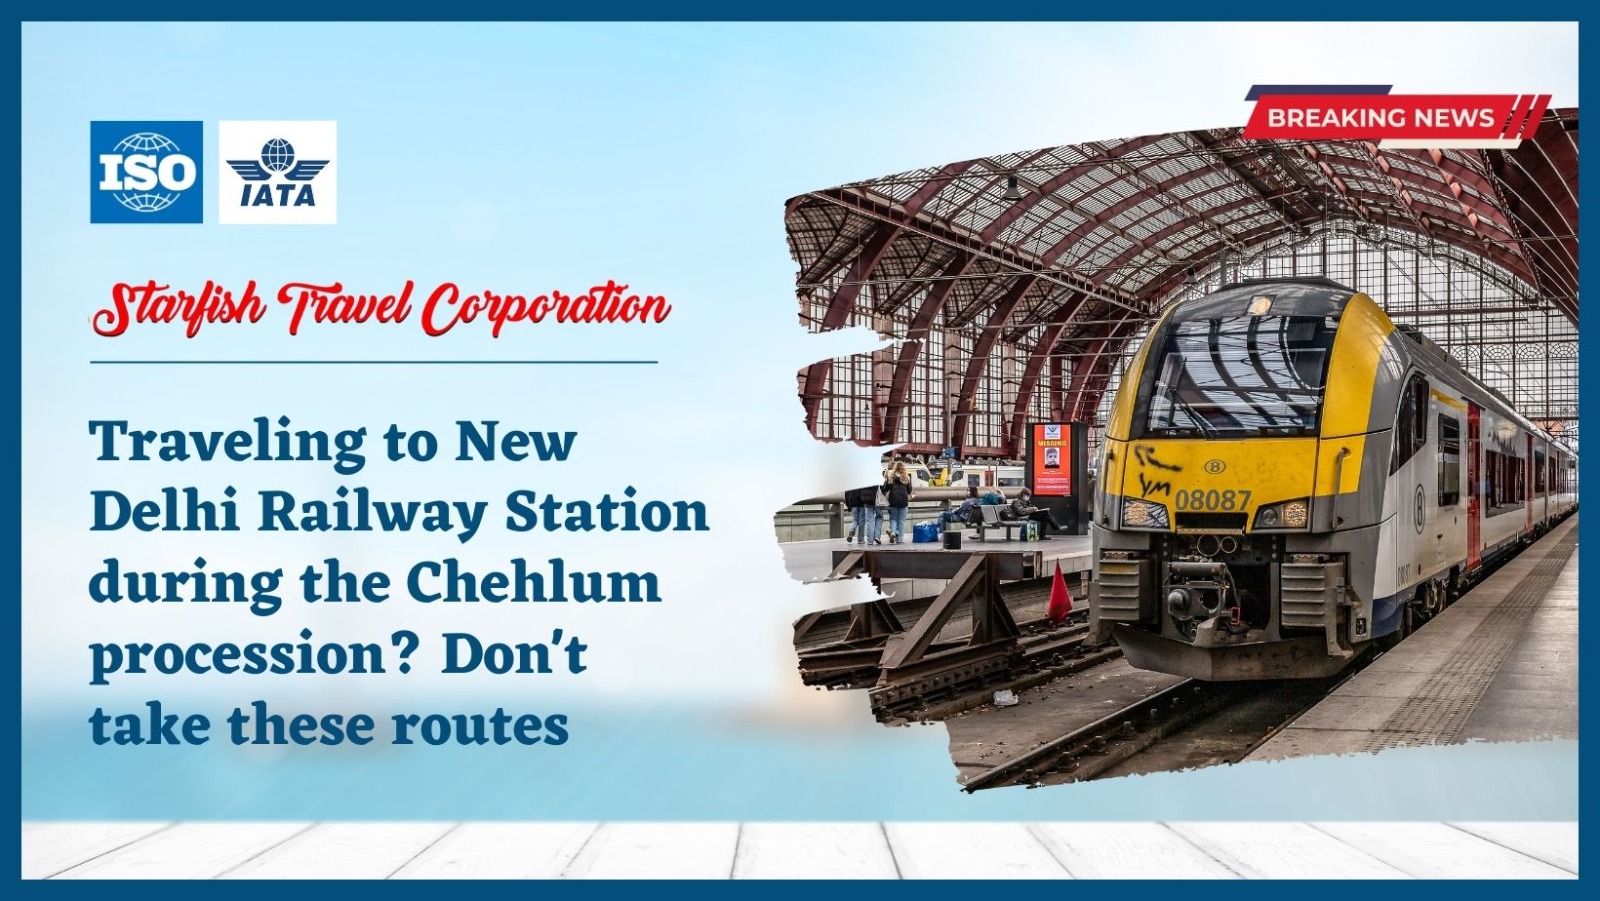 Traveling to New Delhi Railway Station during the Chehlum procession? Don’t take these routes